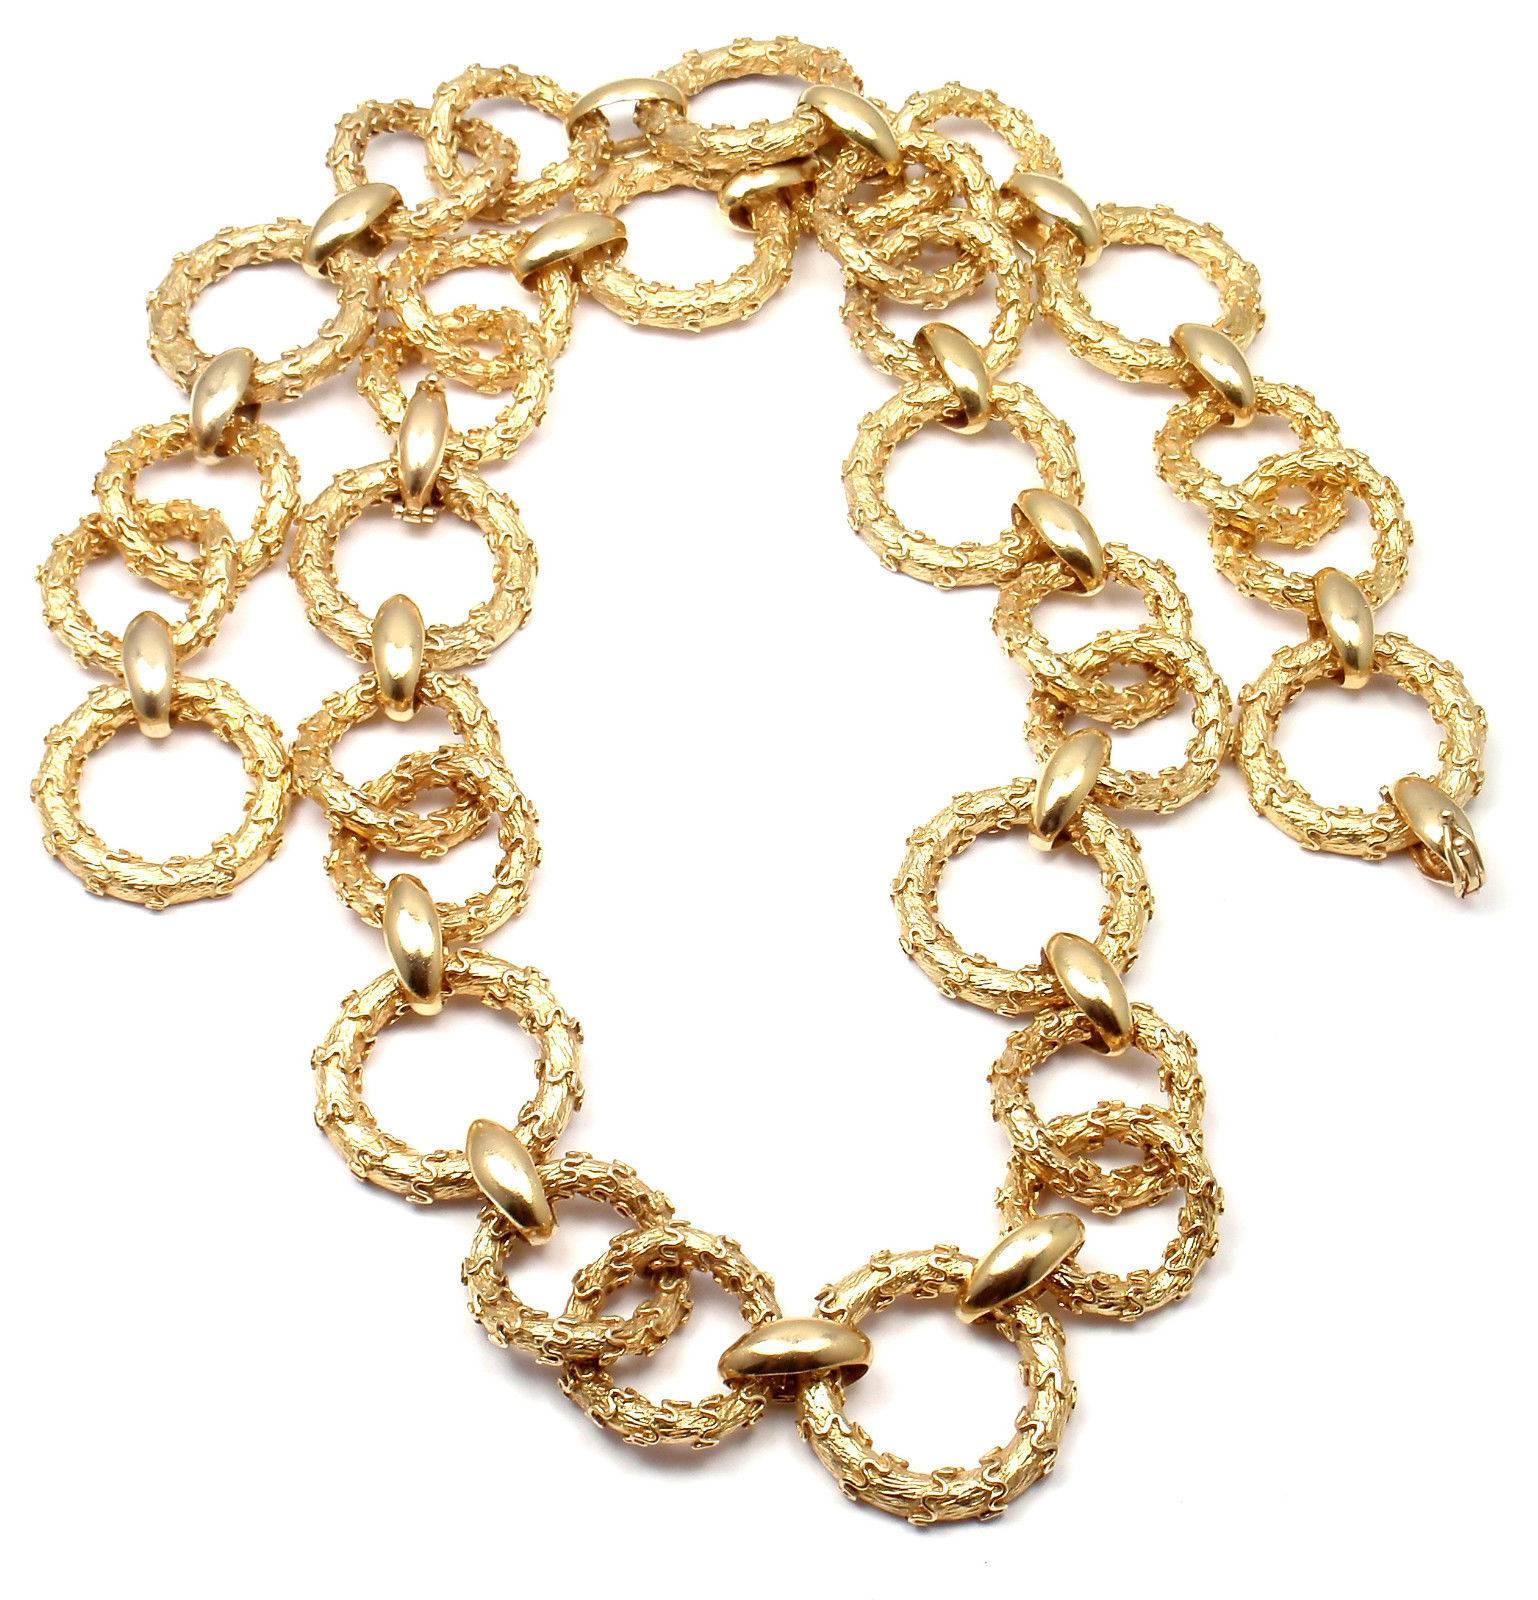 Women's or Men's Hammerman Brothers Gold Link Bracelet And Necklace